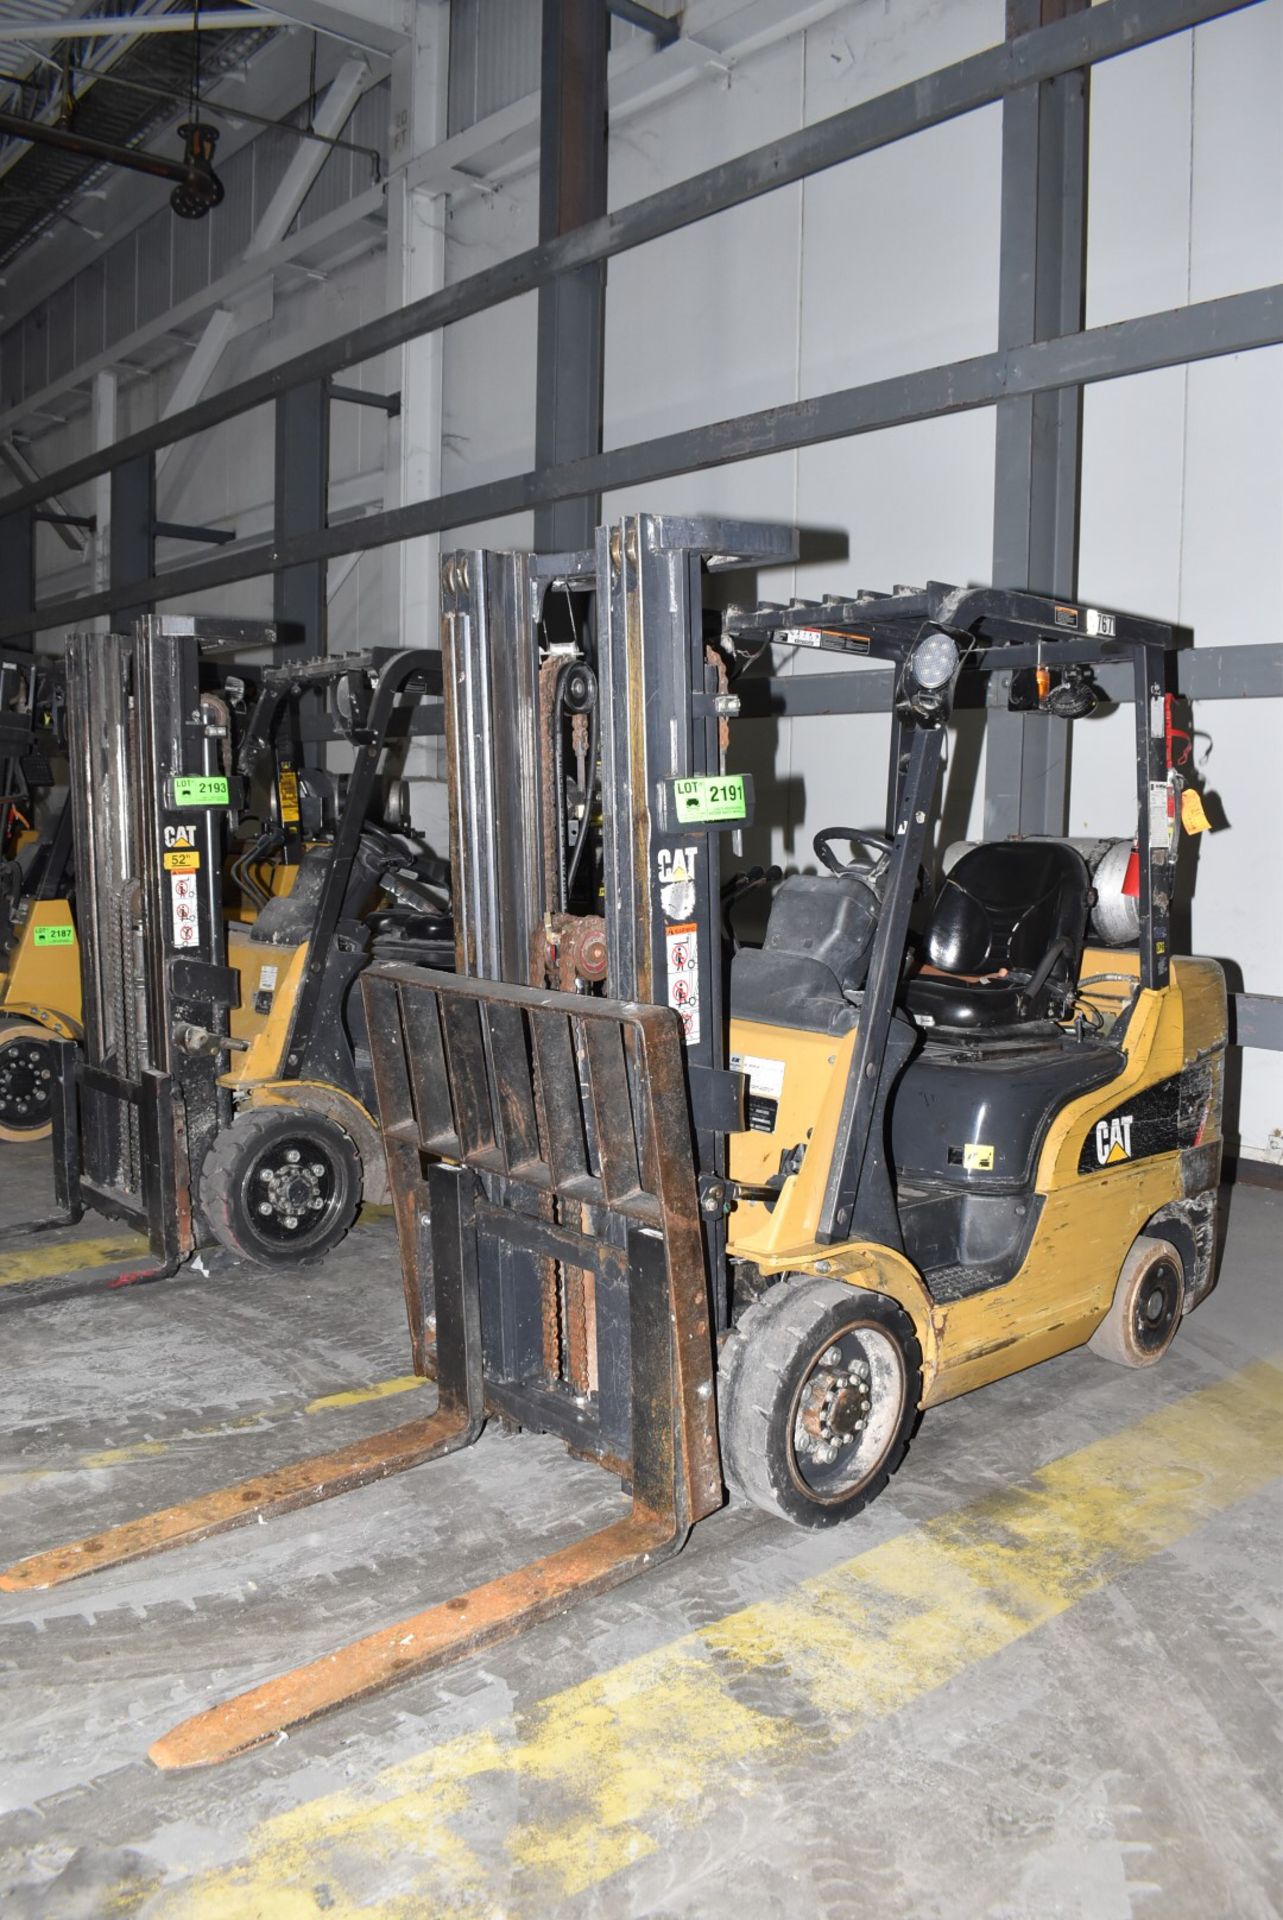 CATERPILLAR 2C6000 6,000 LBS. CAPACITY LPG FORKLIFT WITH 185" MAX VERTICAL REACH, 3-STAGE HIGH